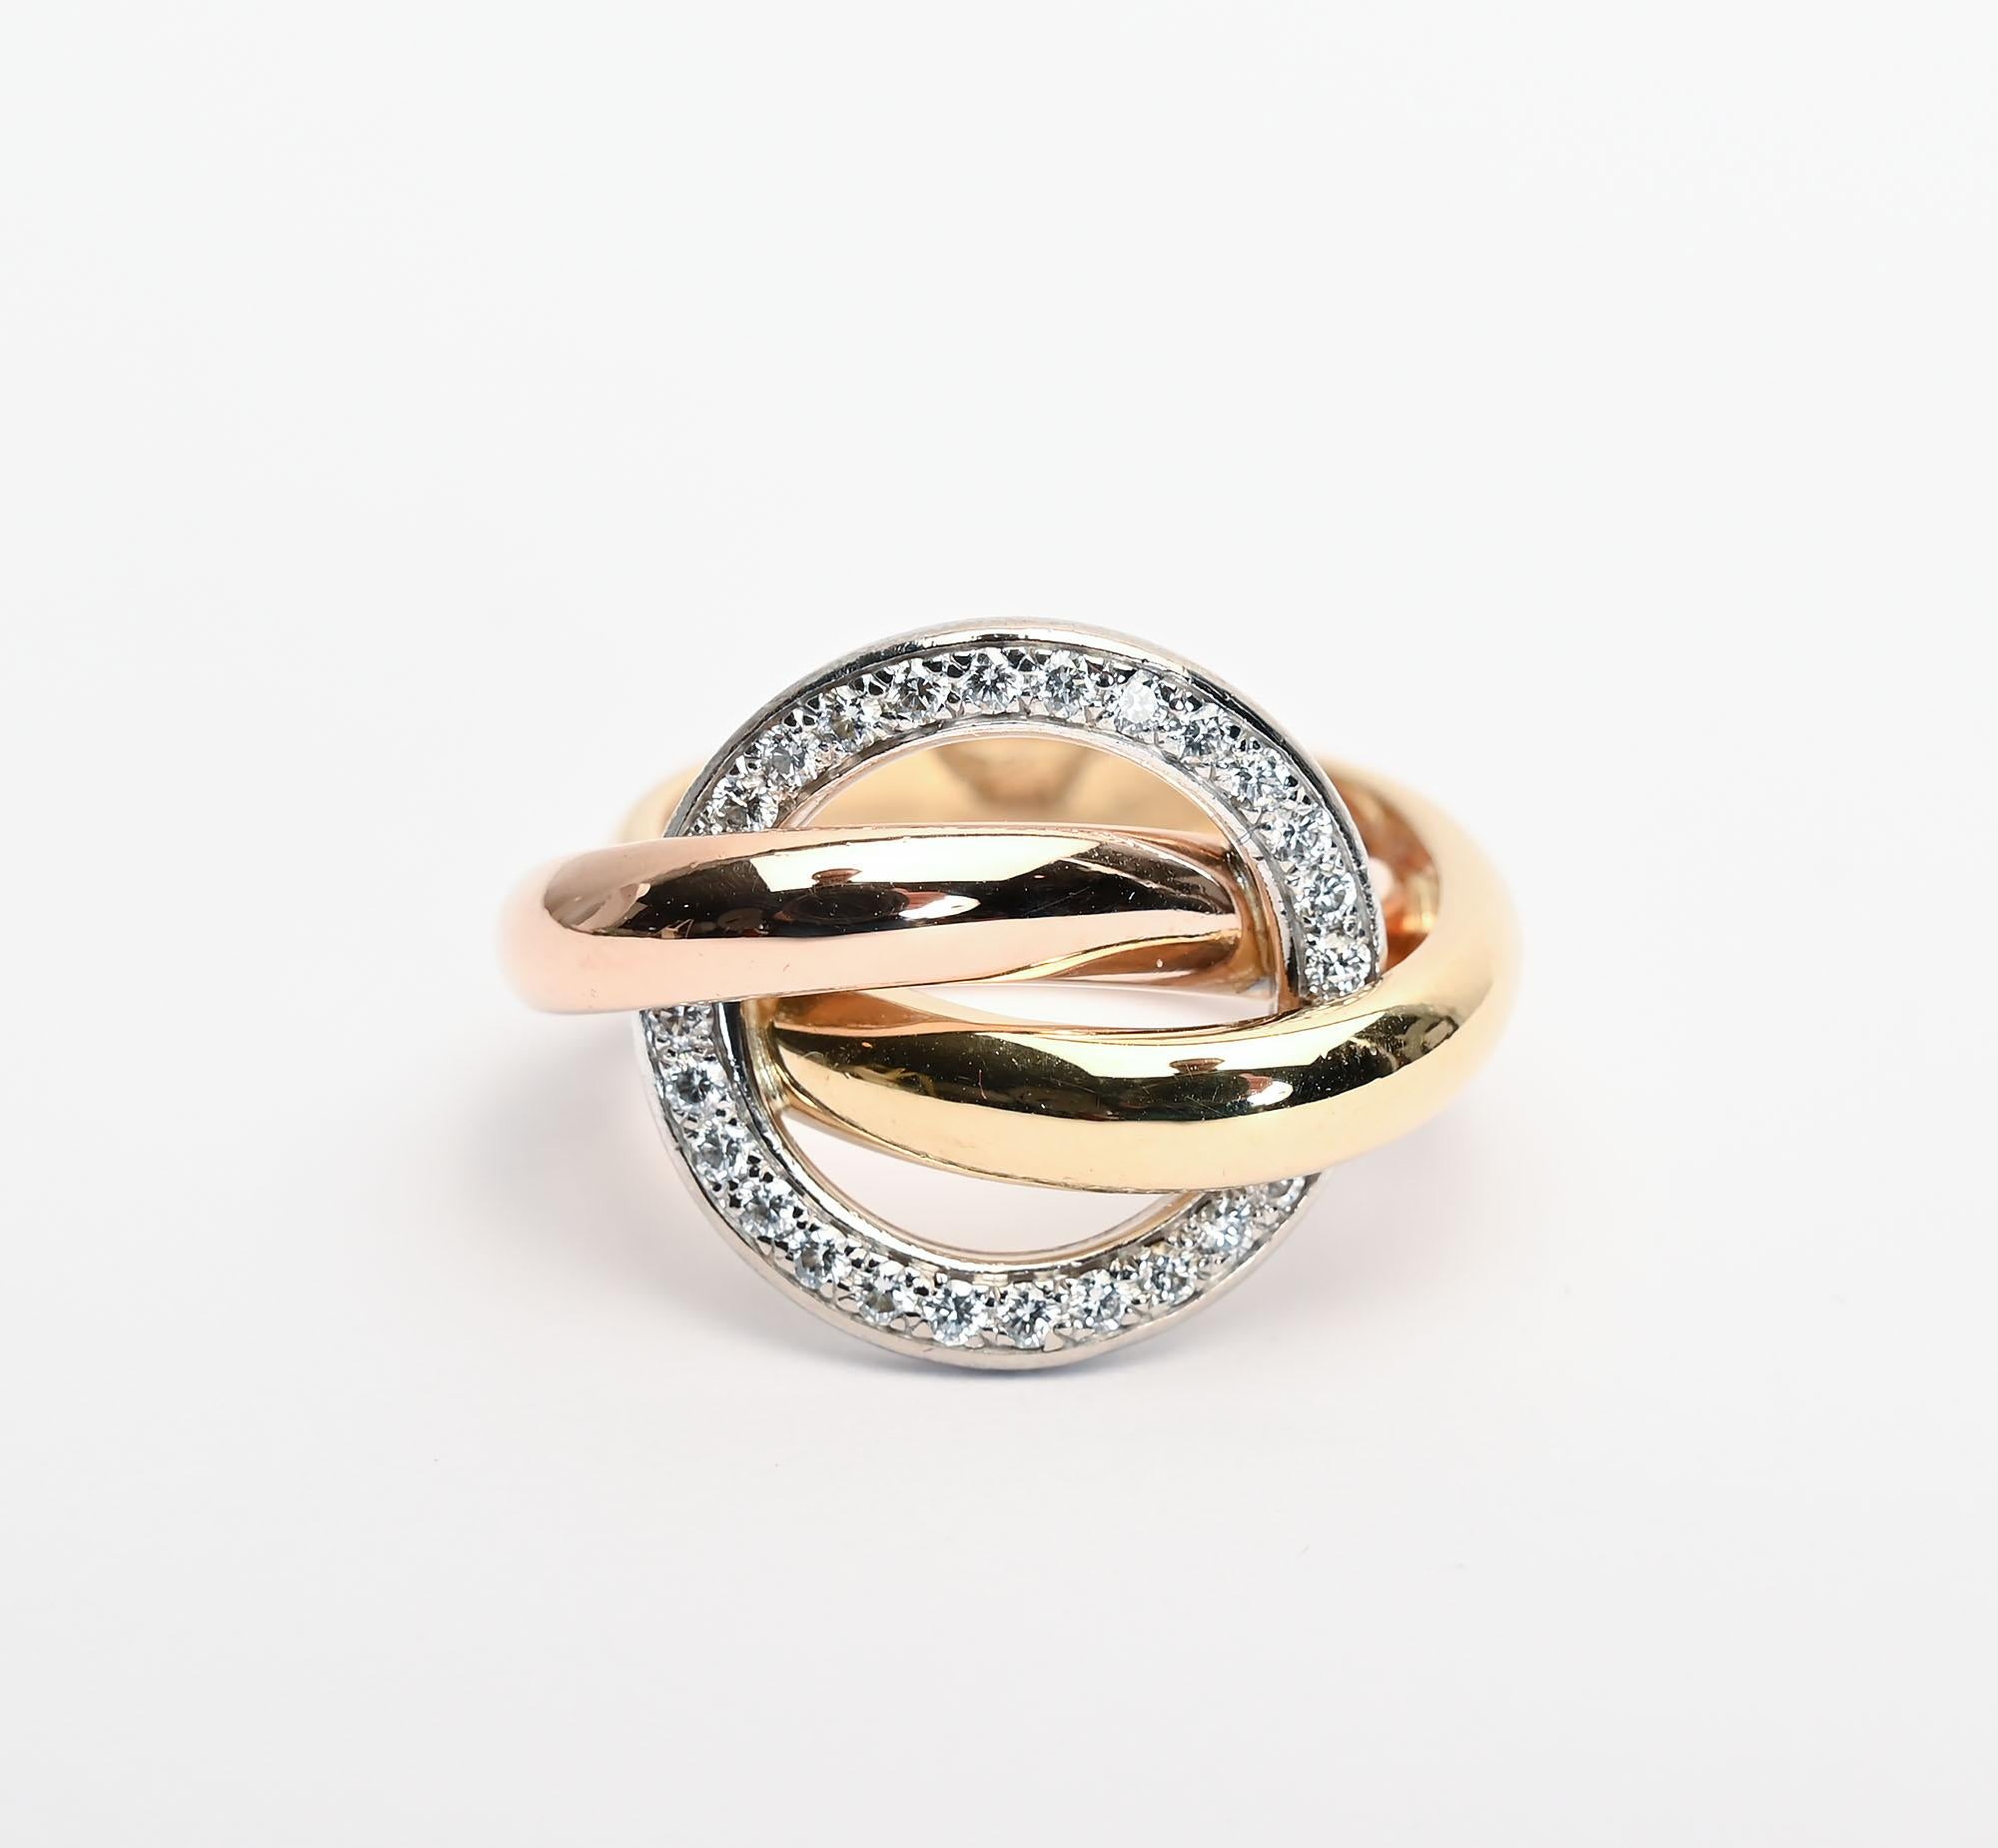 Chic and unusual gold and diamond ring by Cartier. The gold bands are yellow and rose gold. The circle of diamonds is 3/4 inch in diameter. The ring is size 6/34; it can be sized by a capable jeweler. This fashionable ring can be worn equally well